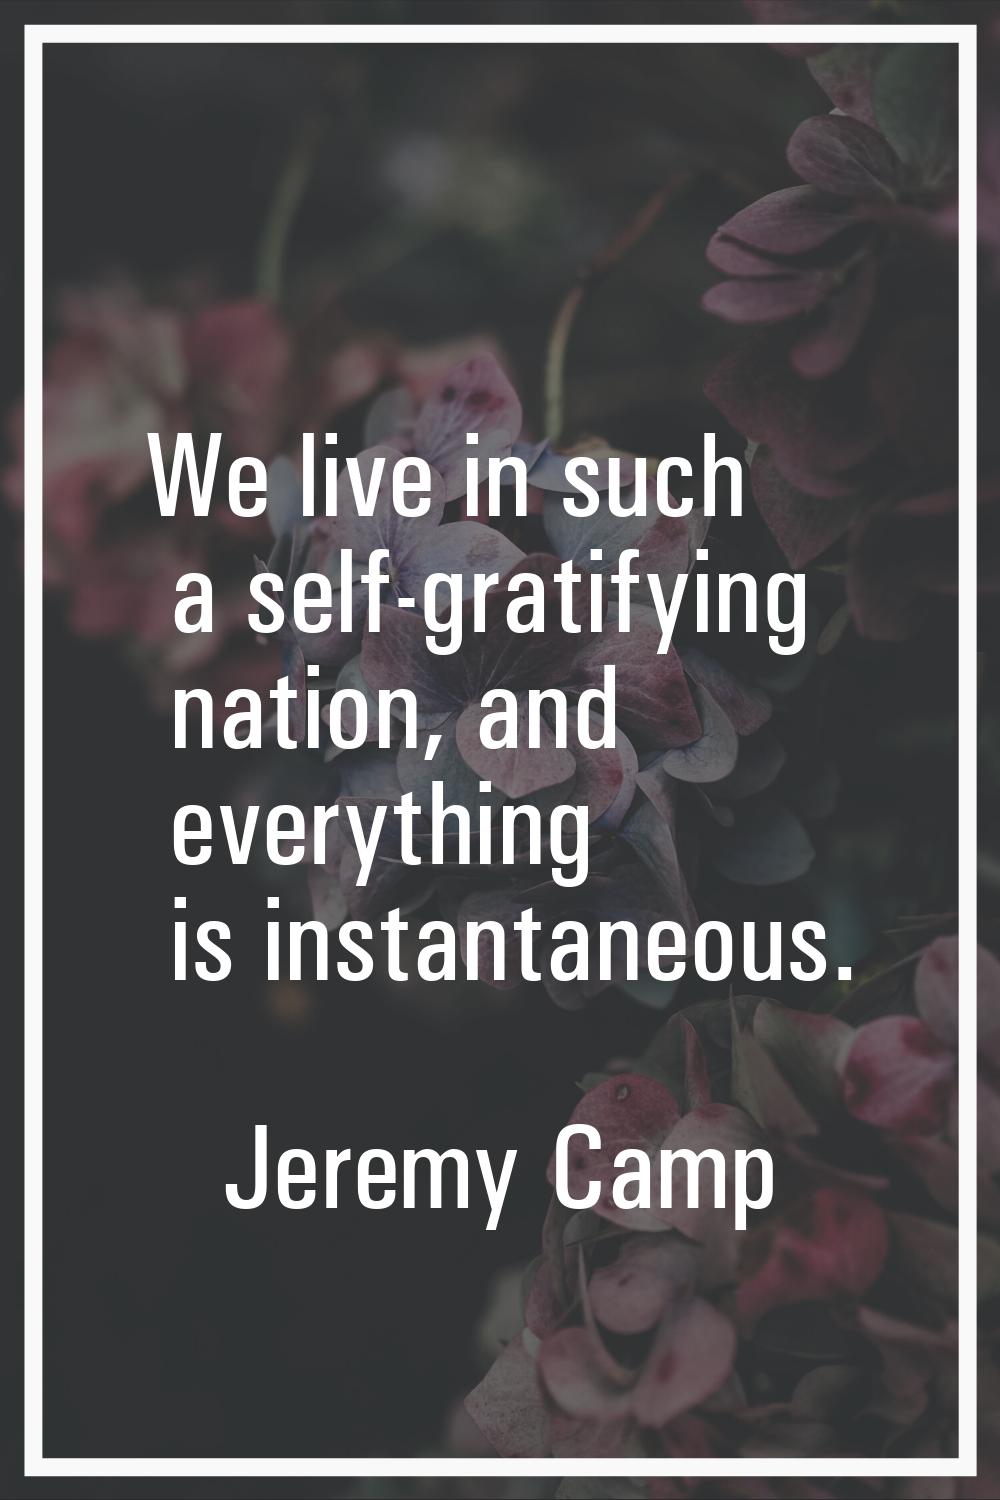 We live in such a self-gratifying nation, and everything is instantaneous.